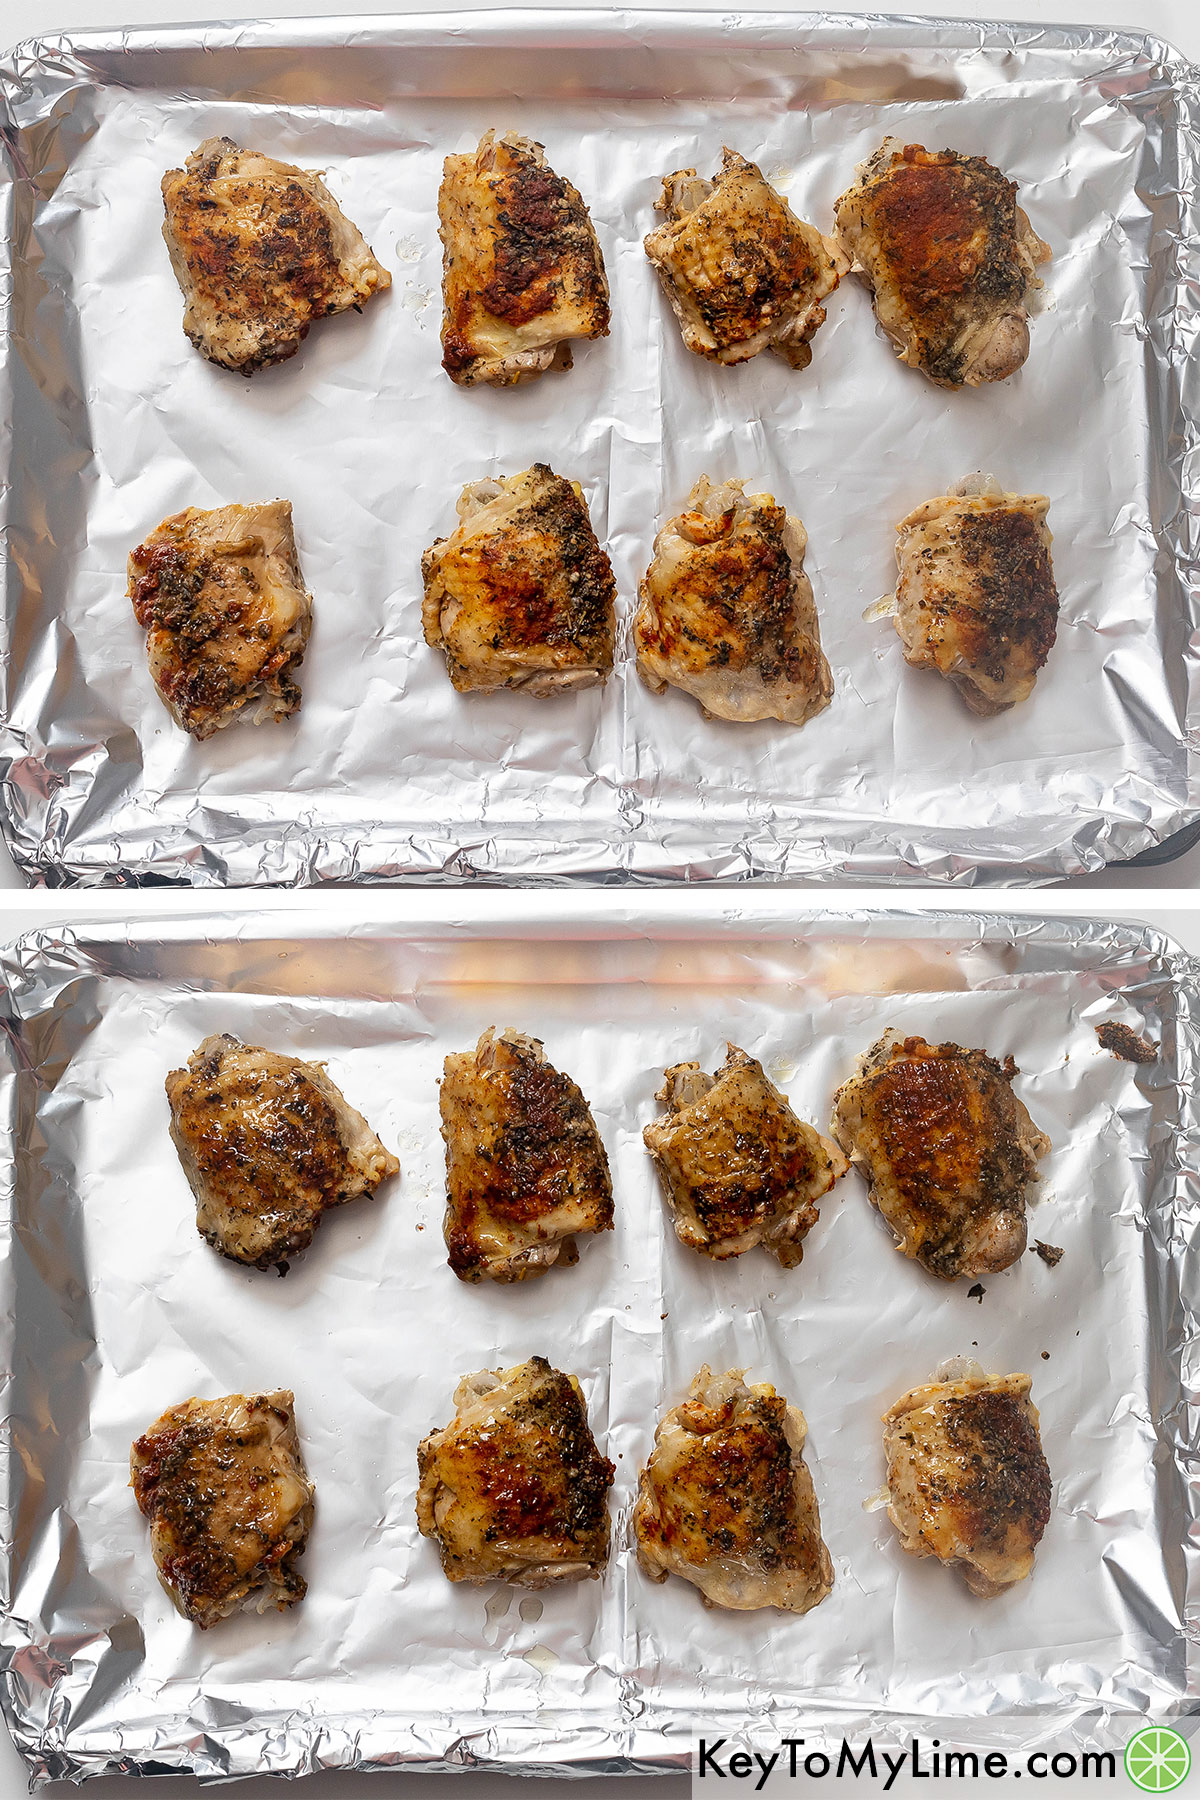 Placing the chicken thighs on a baking sheet lined with aluminum foil and brushing the skin with oil then broiling to crisp the skin.